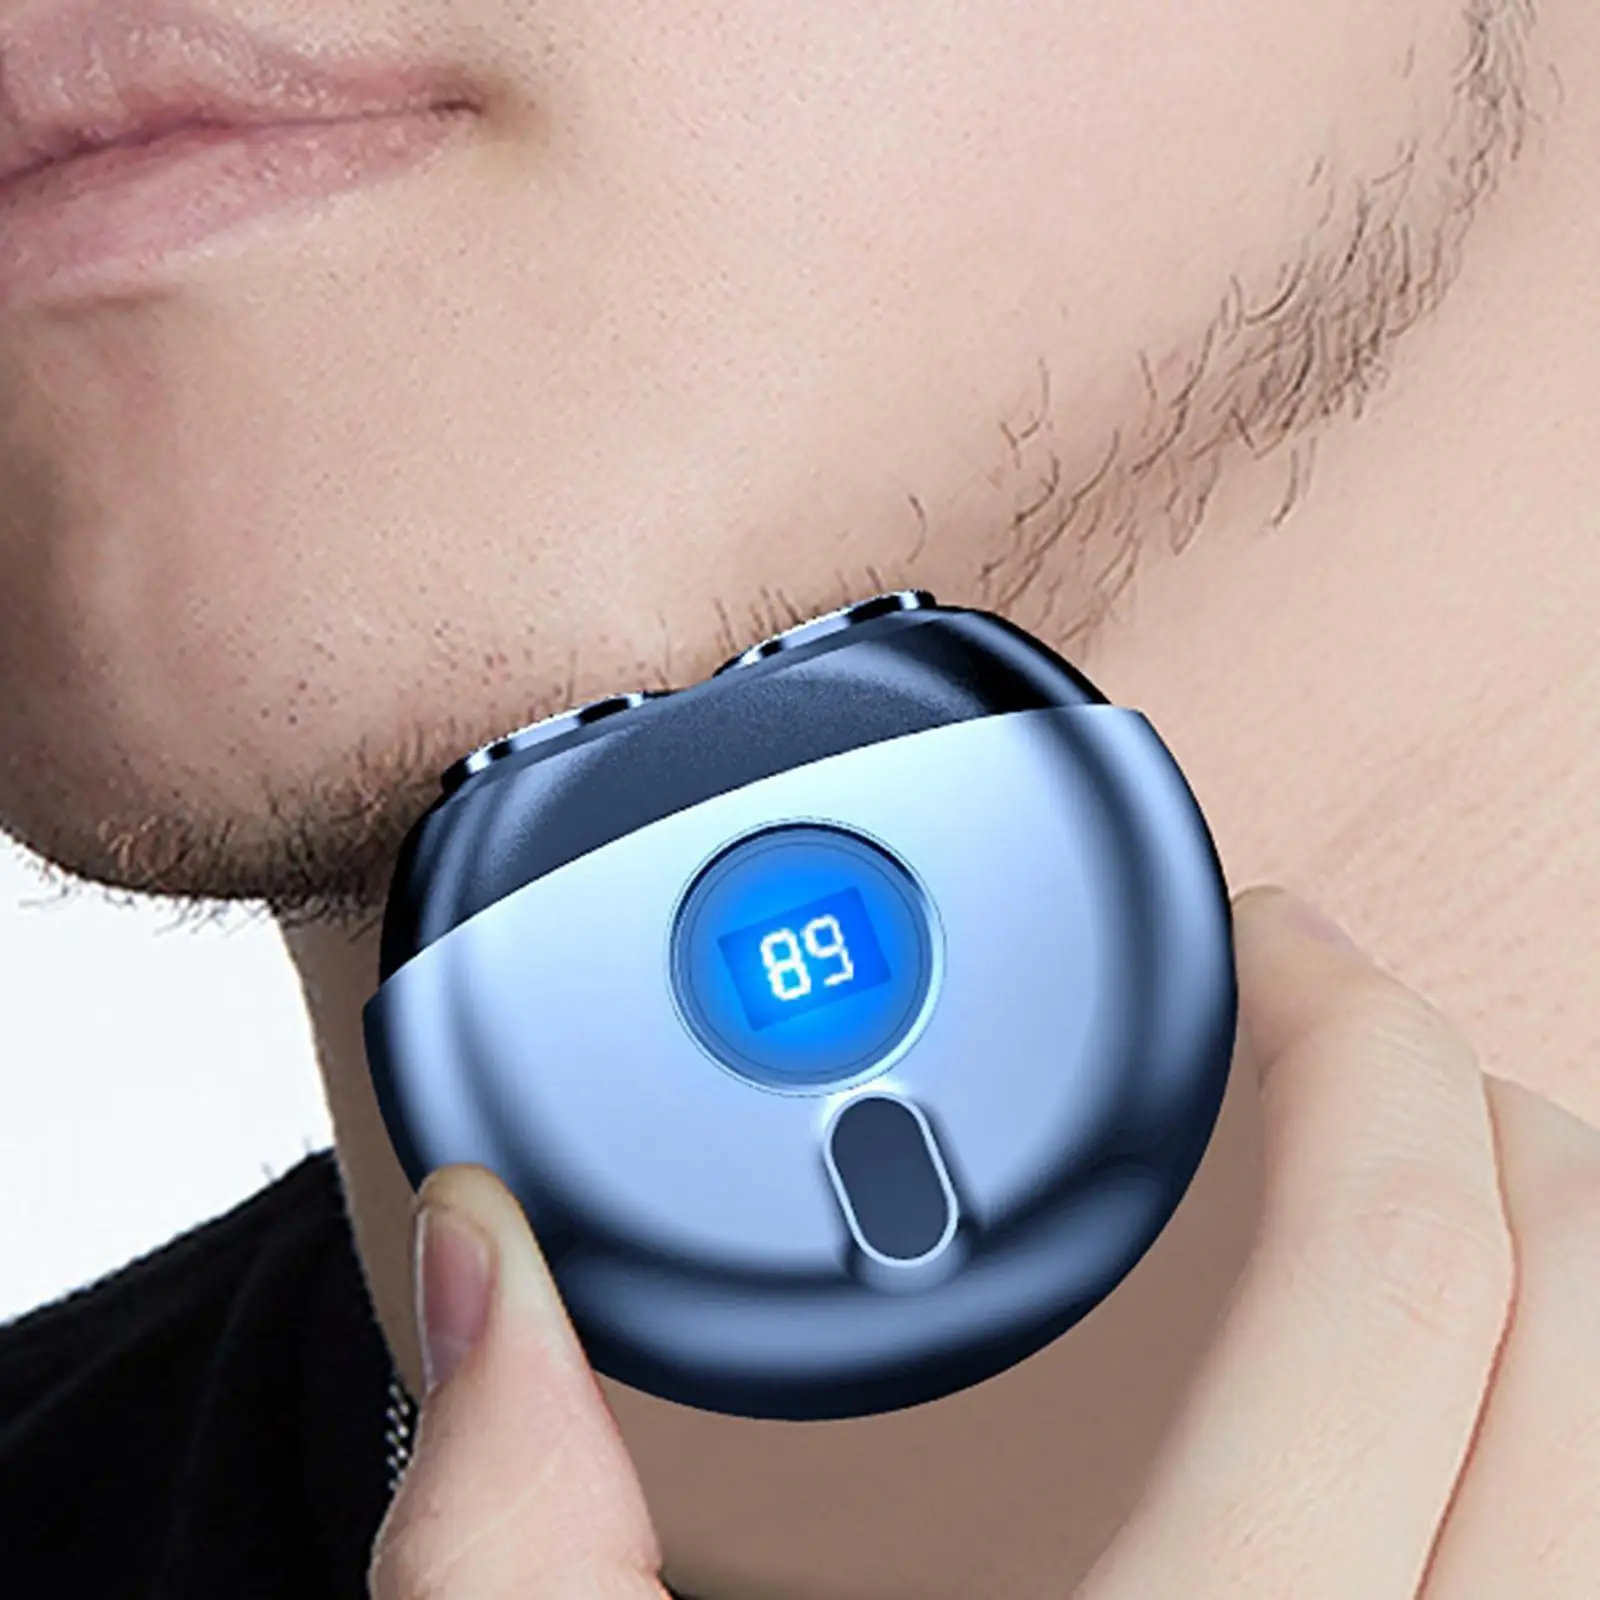 Multifunction Electric Shaver Durable Wet Use Rechargeable Gift Waterproof Shaving Facial trimmers Father Men Husband